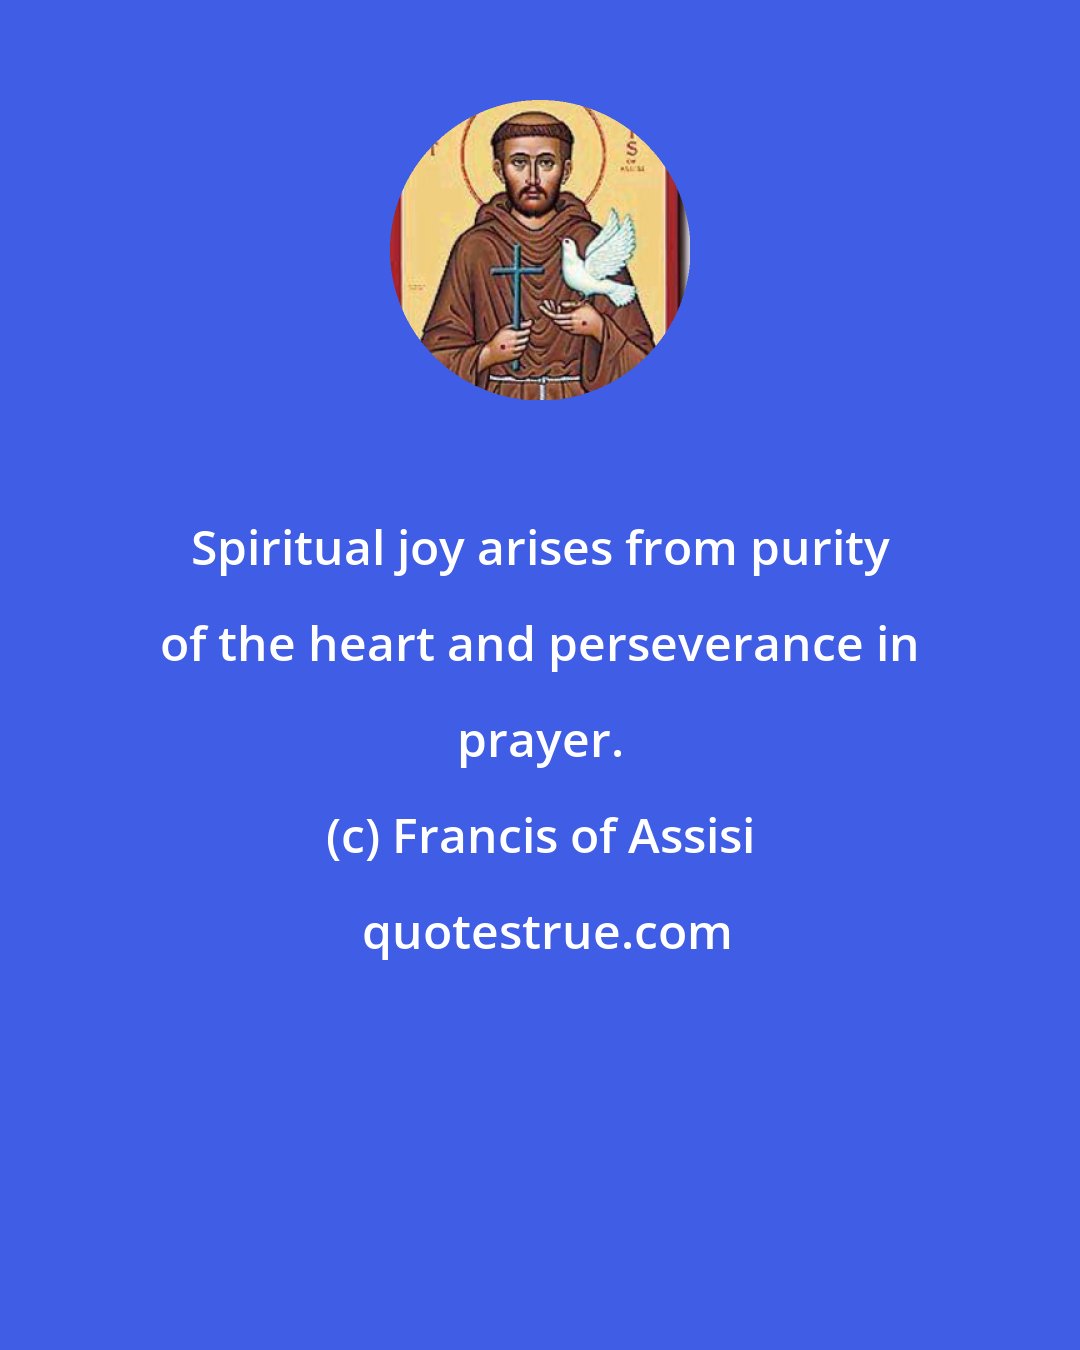 Francis of Assisi: Spiritual joy arises from purity of the heart and perseverance in prayer.